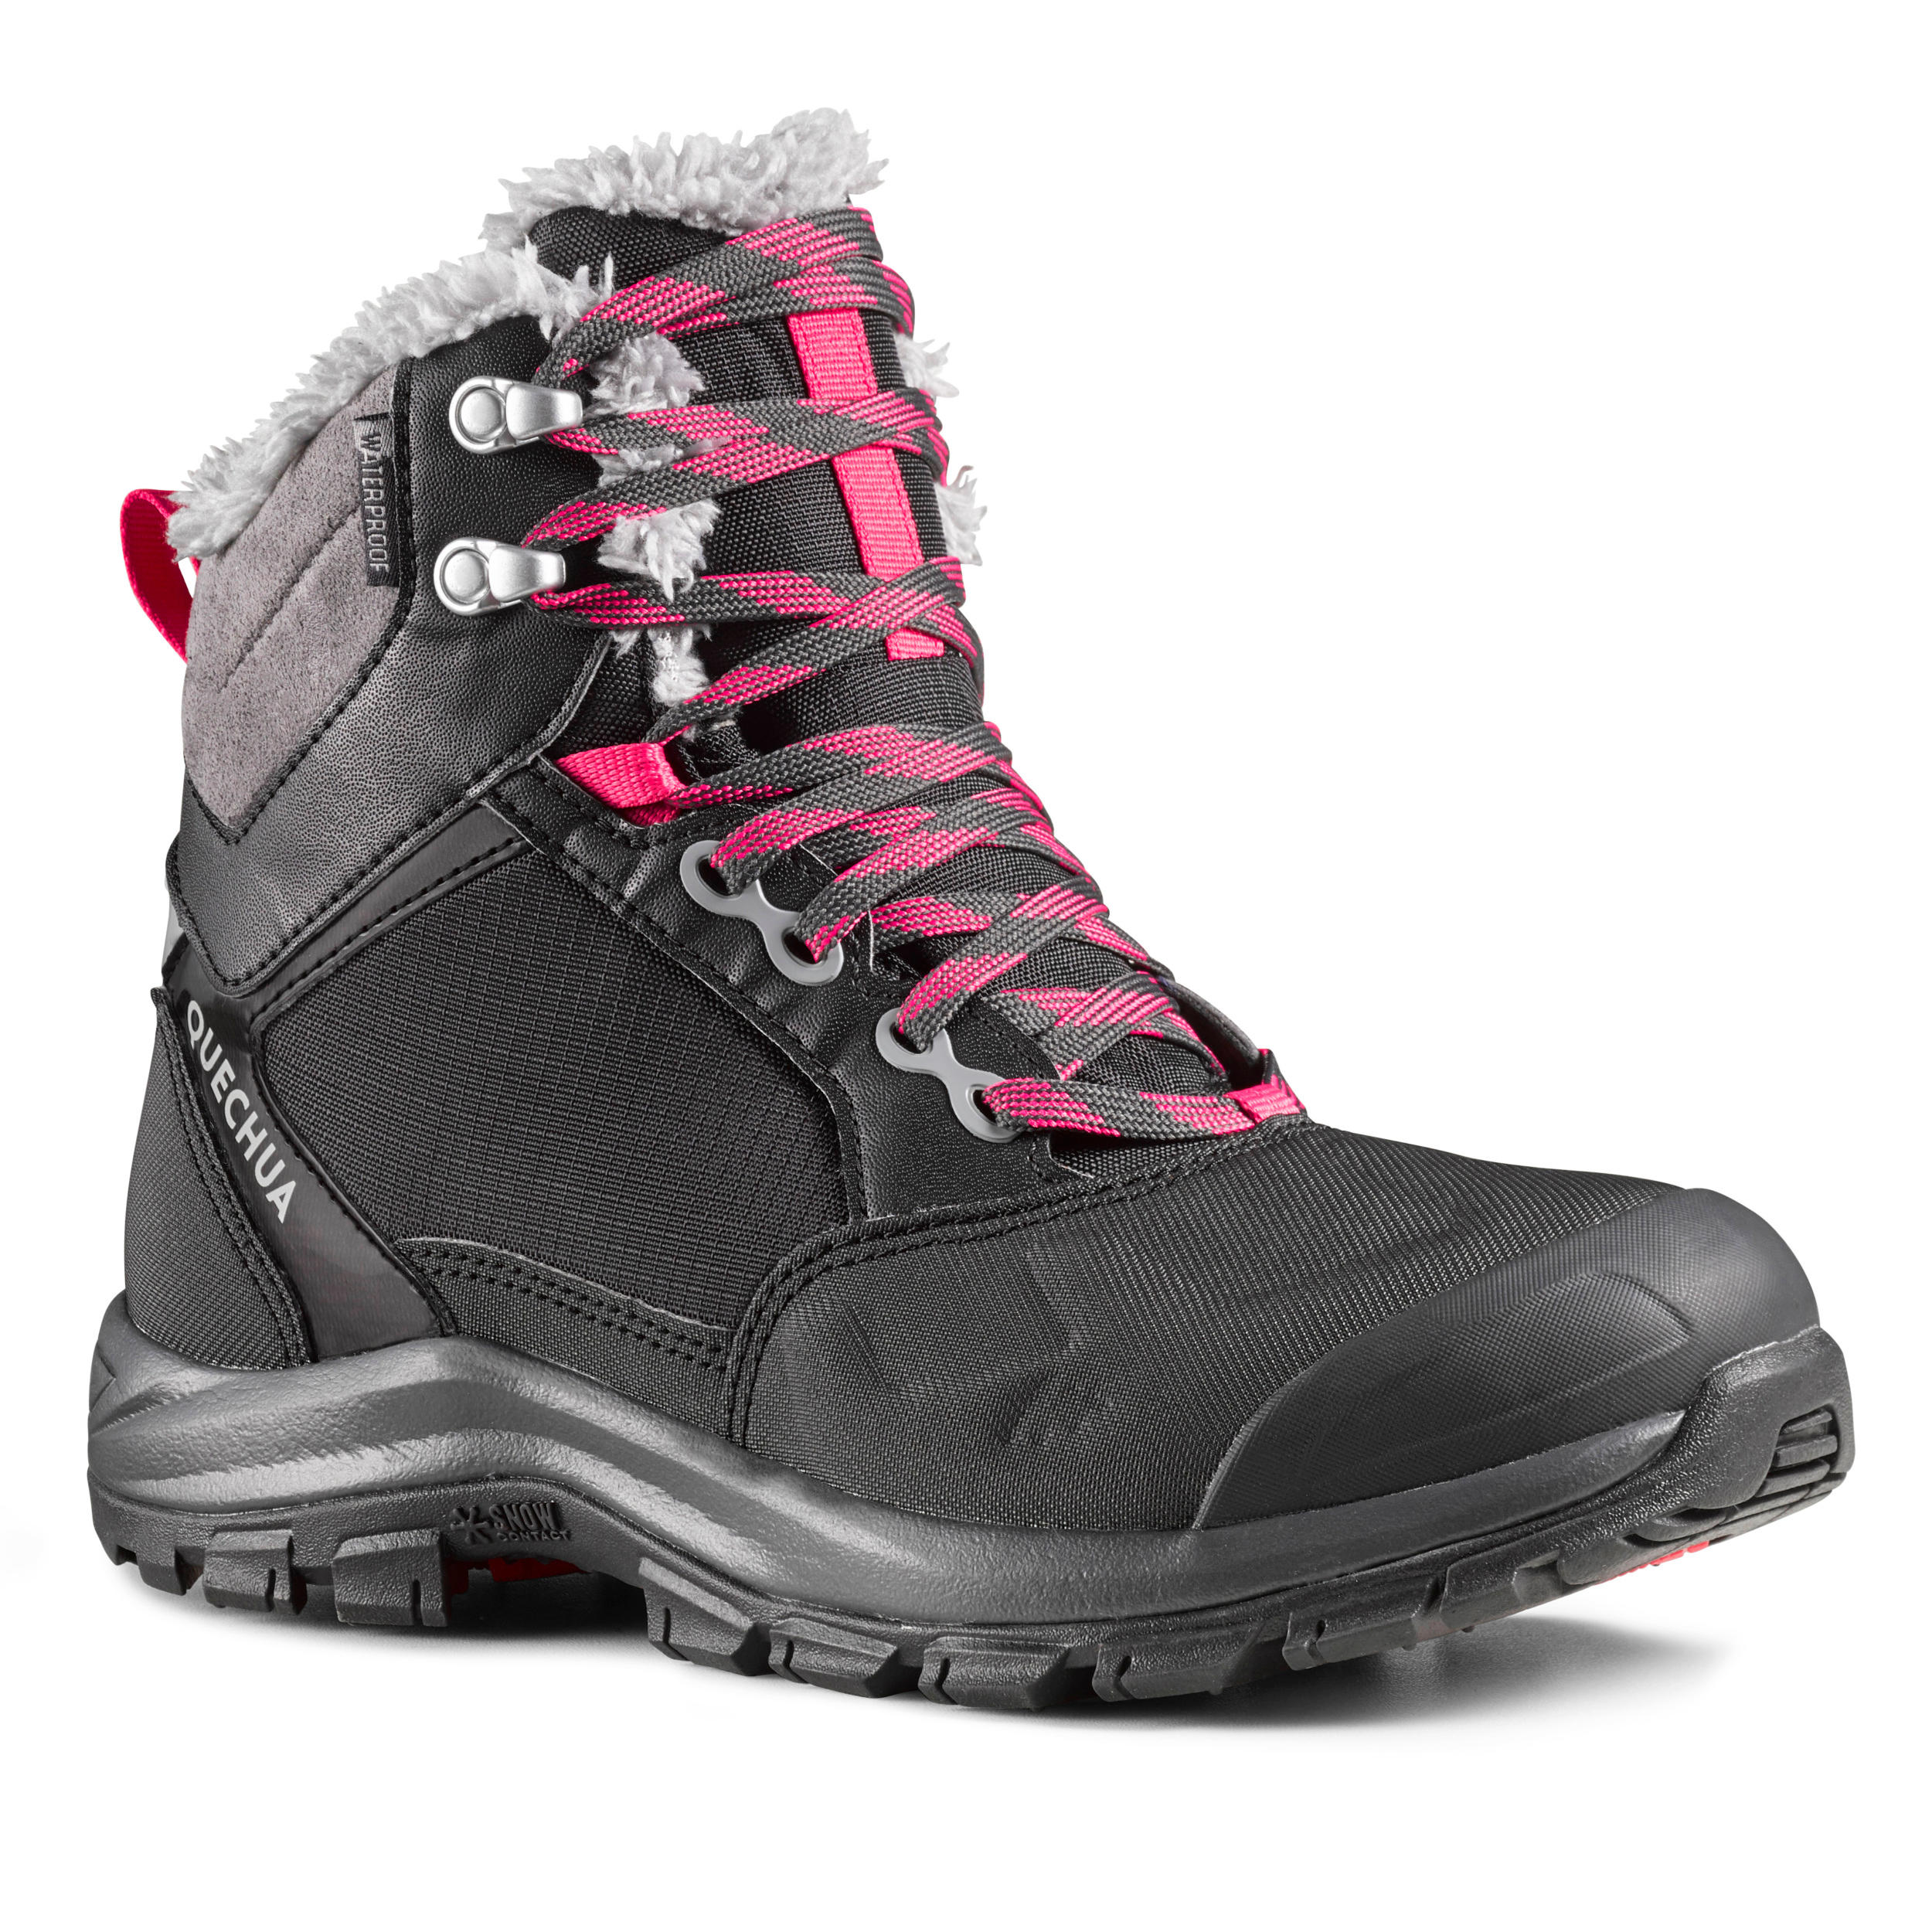 Snow Boots | Winter Boots for Ladies 